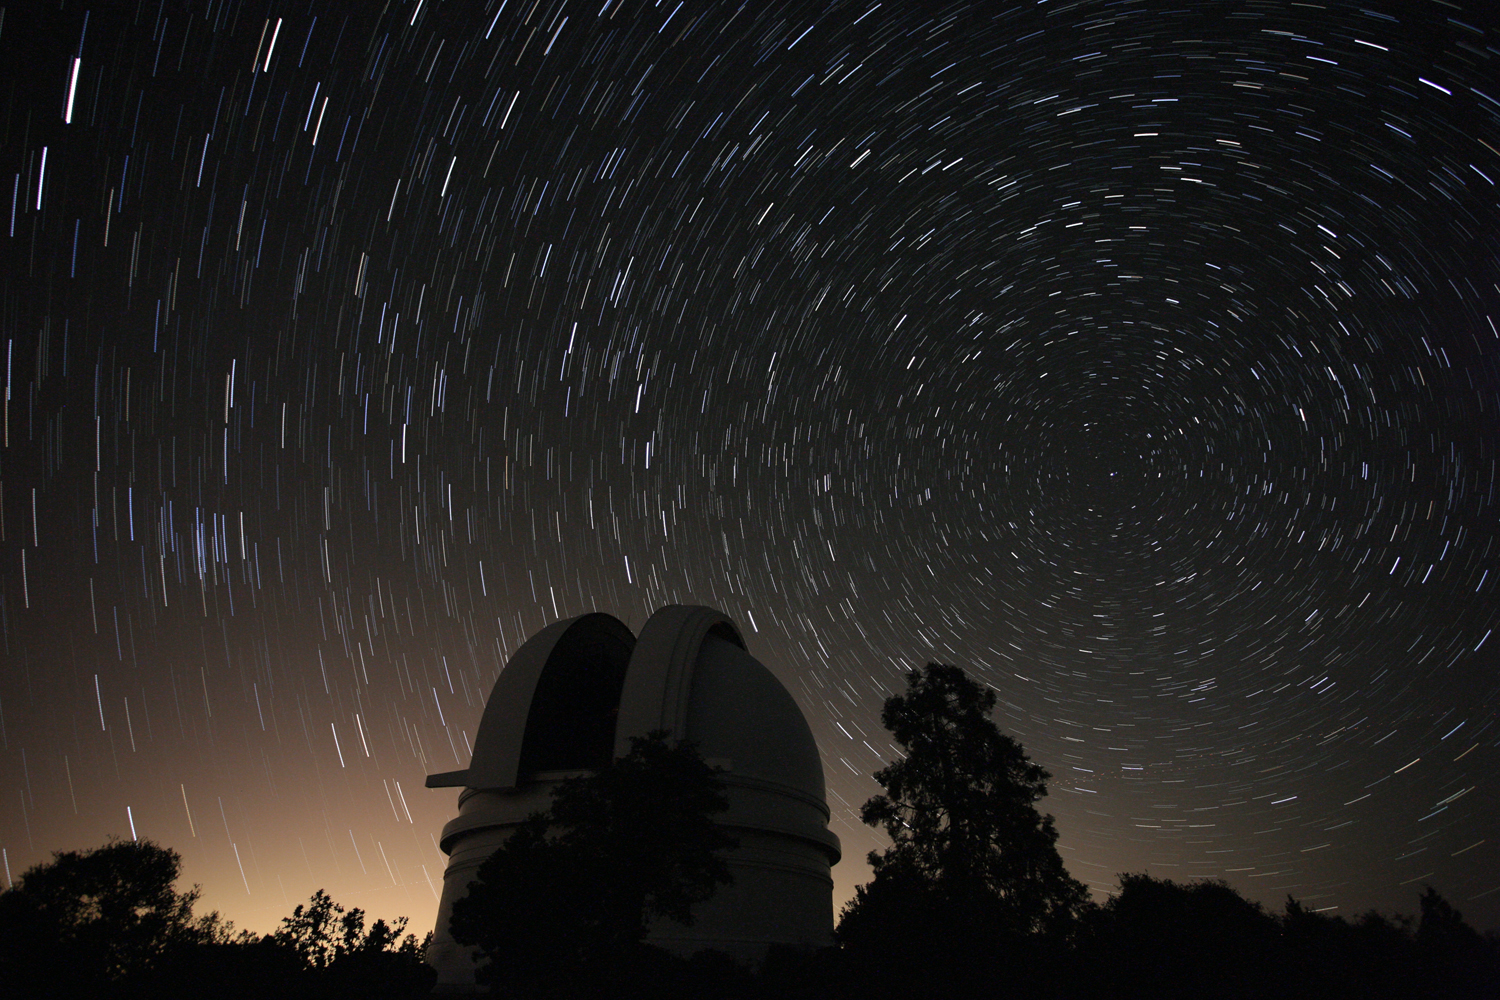 Palomar Skies: The Stars in the sky go round and round. . . .